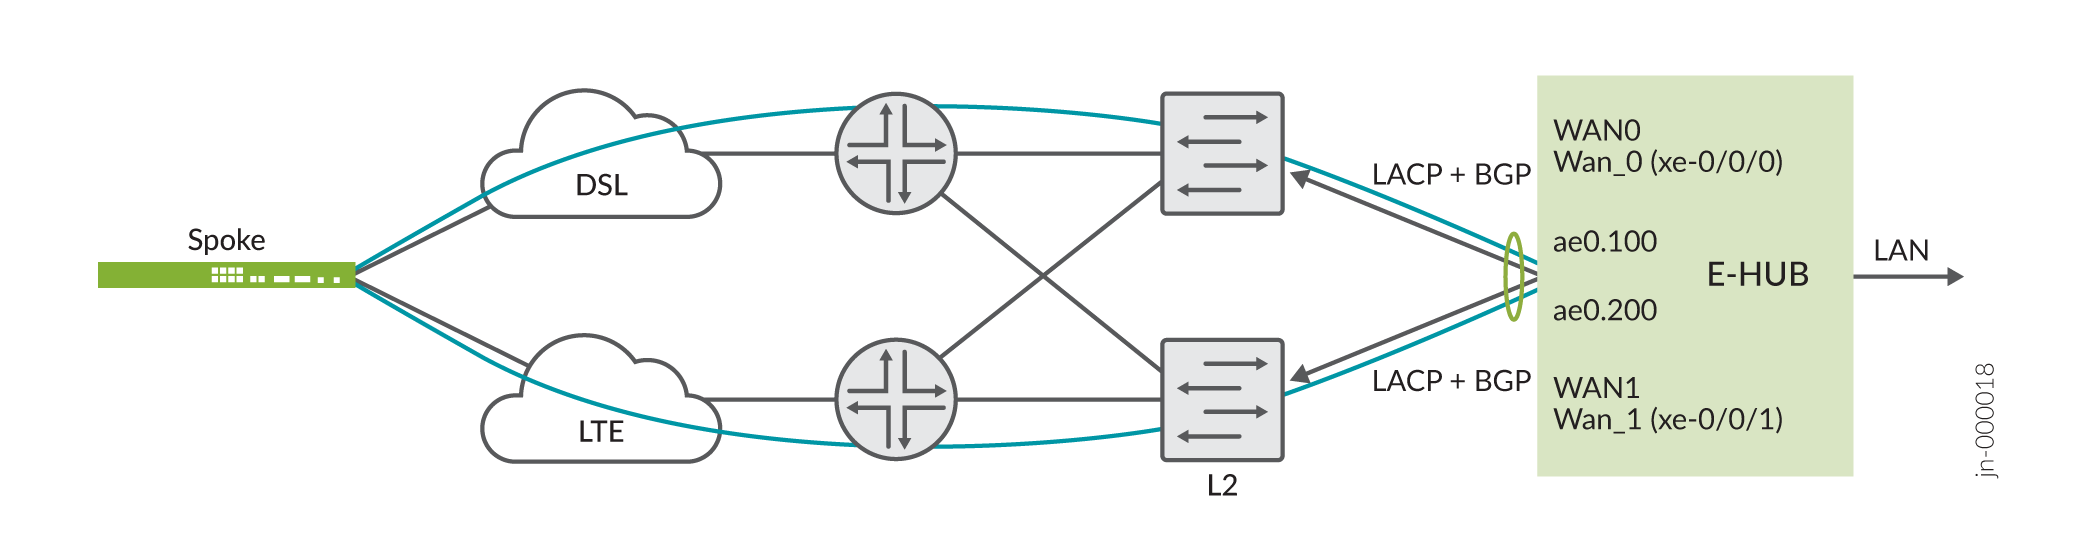 Aggregated Ethernet Topology
of Enterprise Hub WAN Links (With VLAN Tagging)